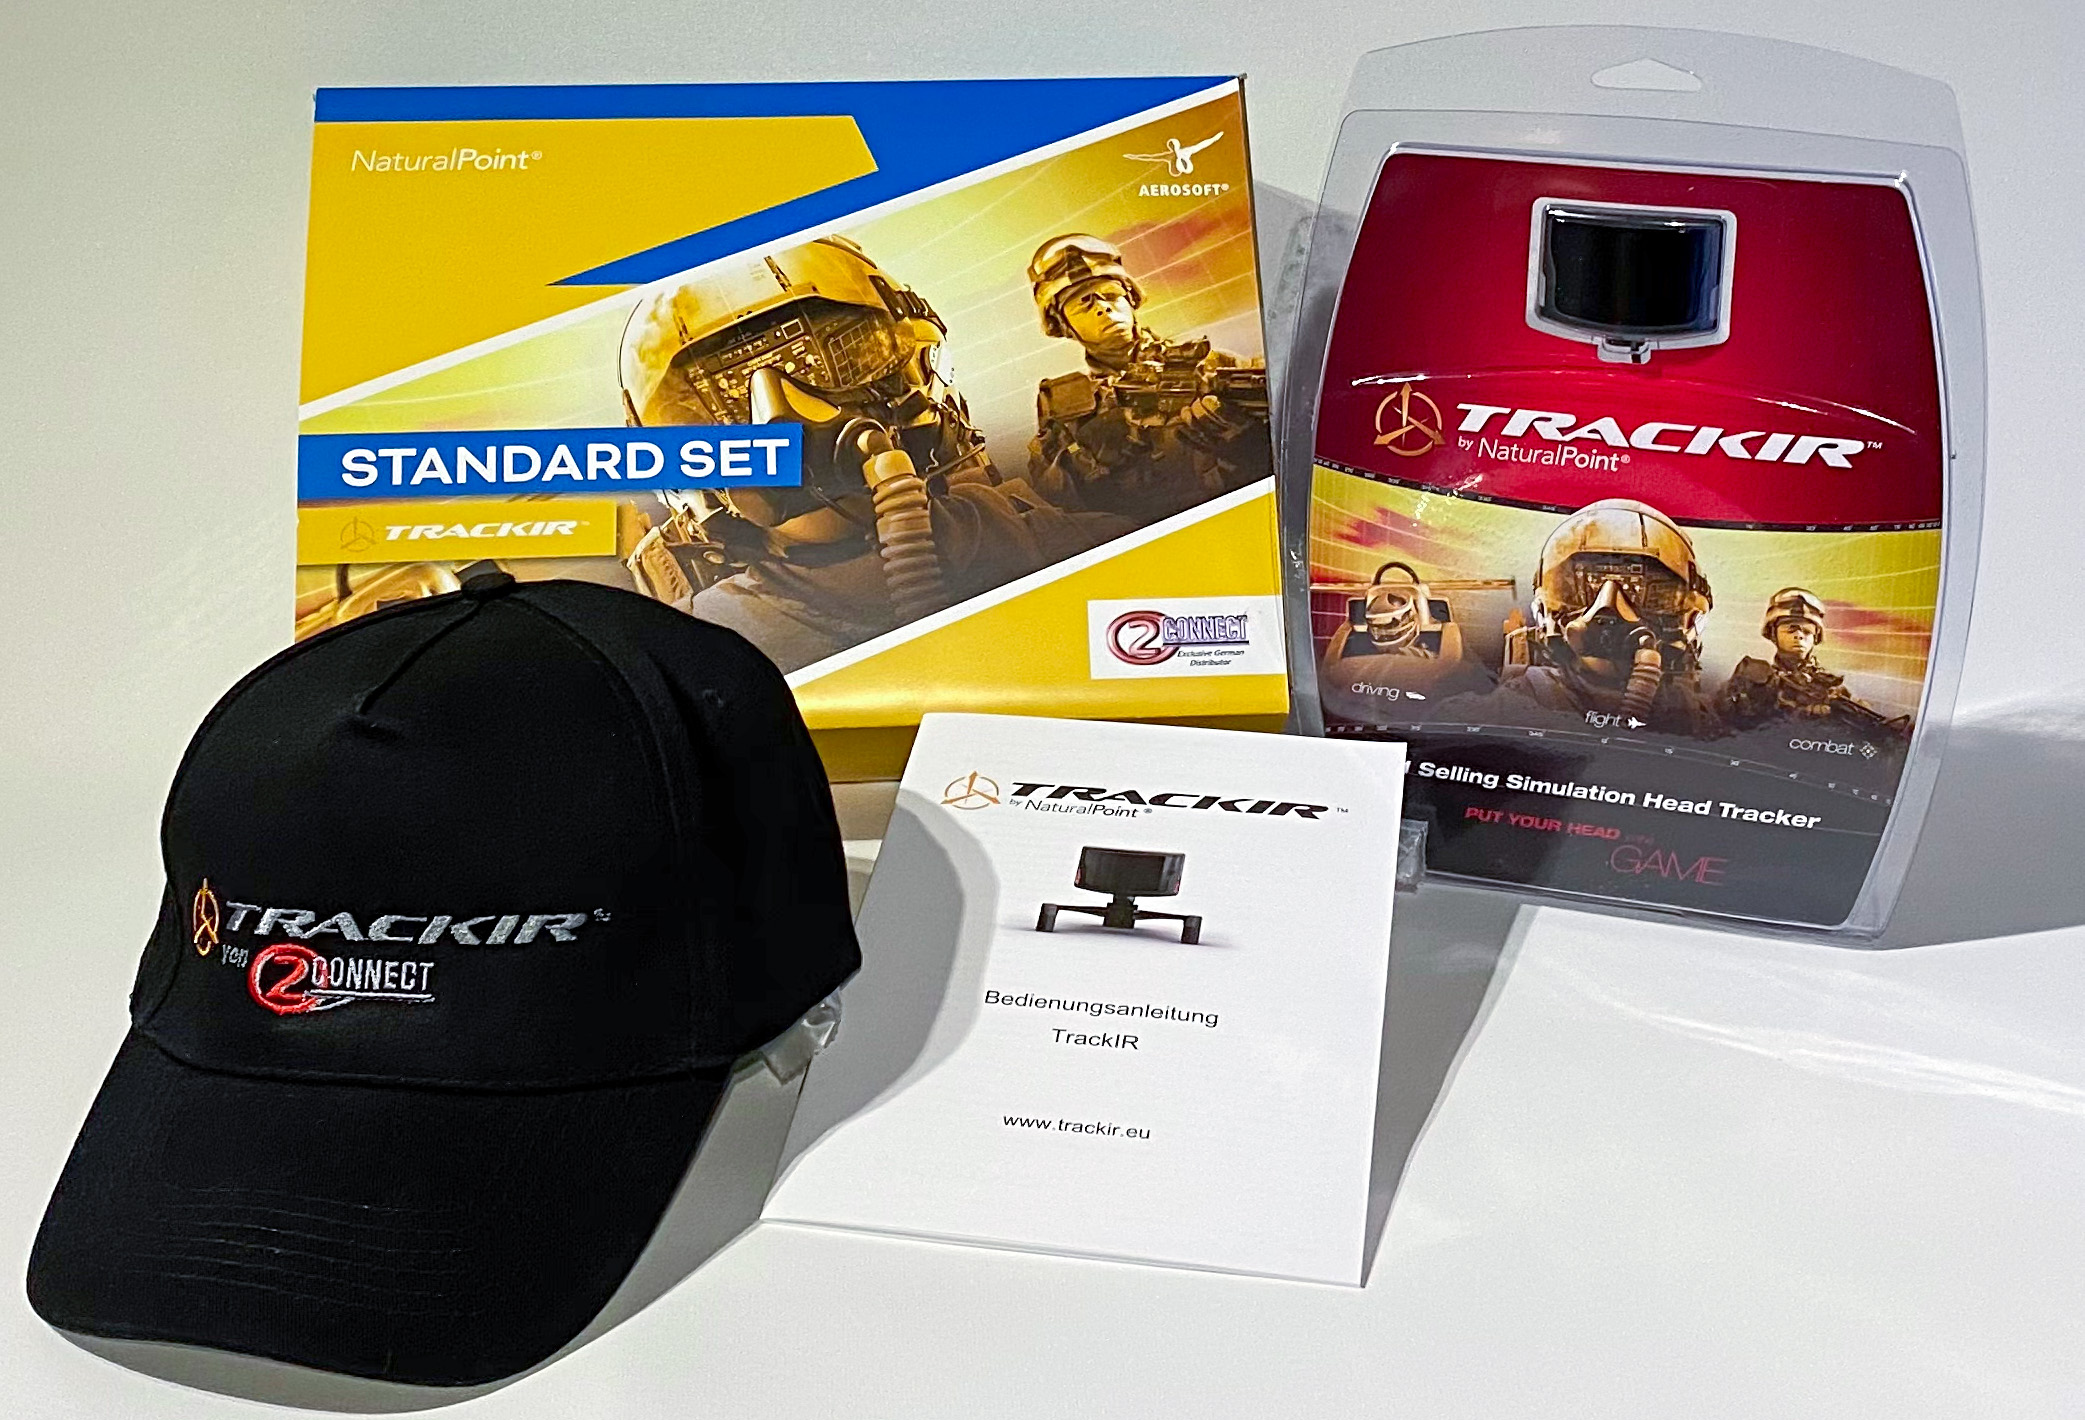 NaturalPoint TrackIR 5 Head Tracker for Simulation Games for sale online